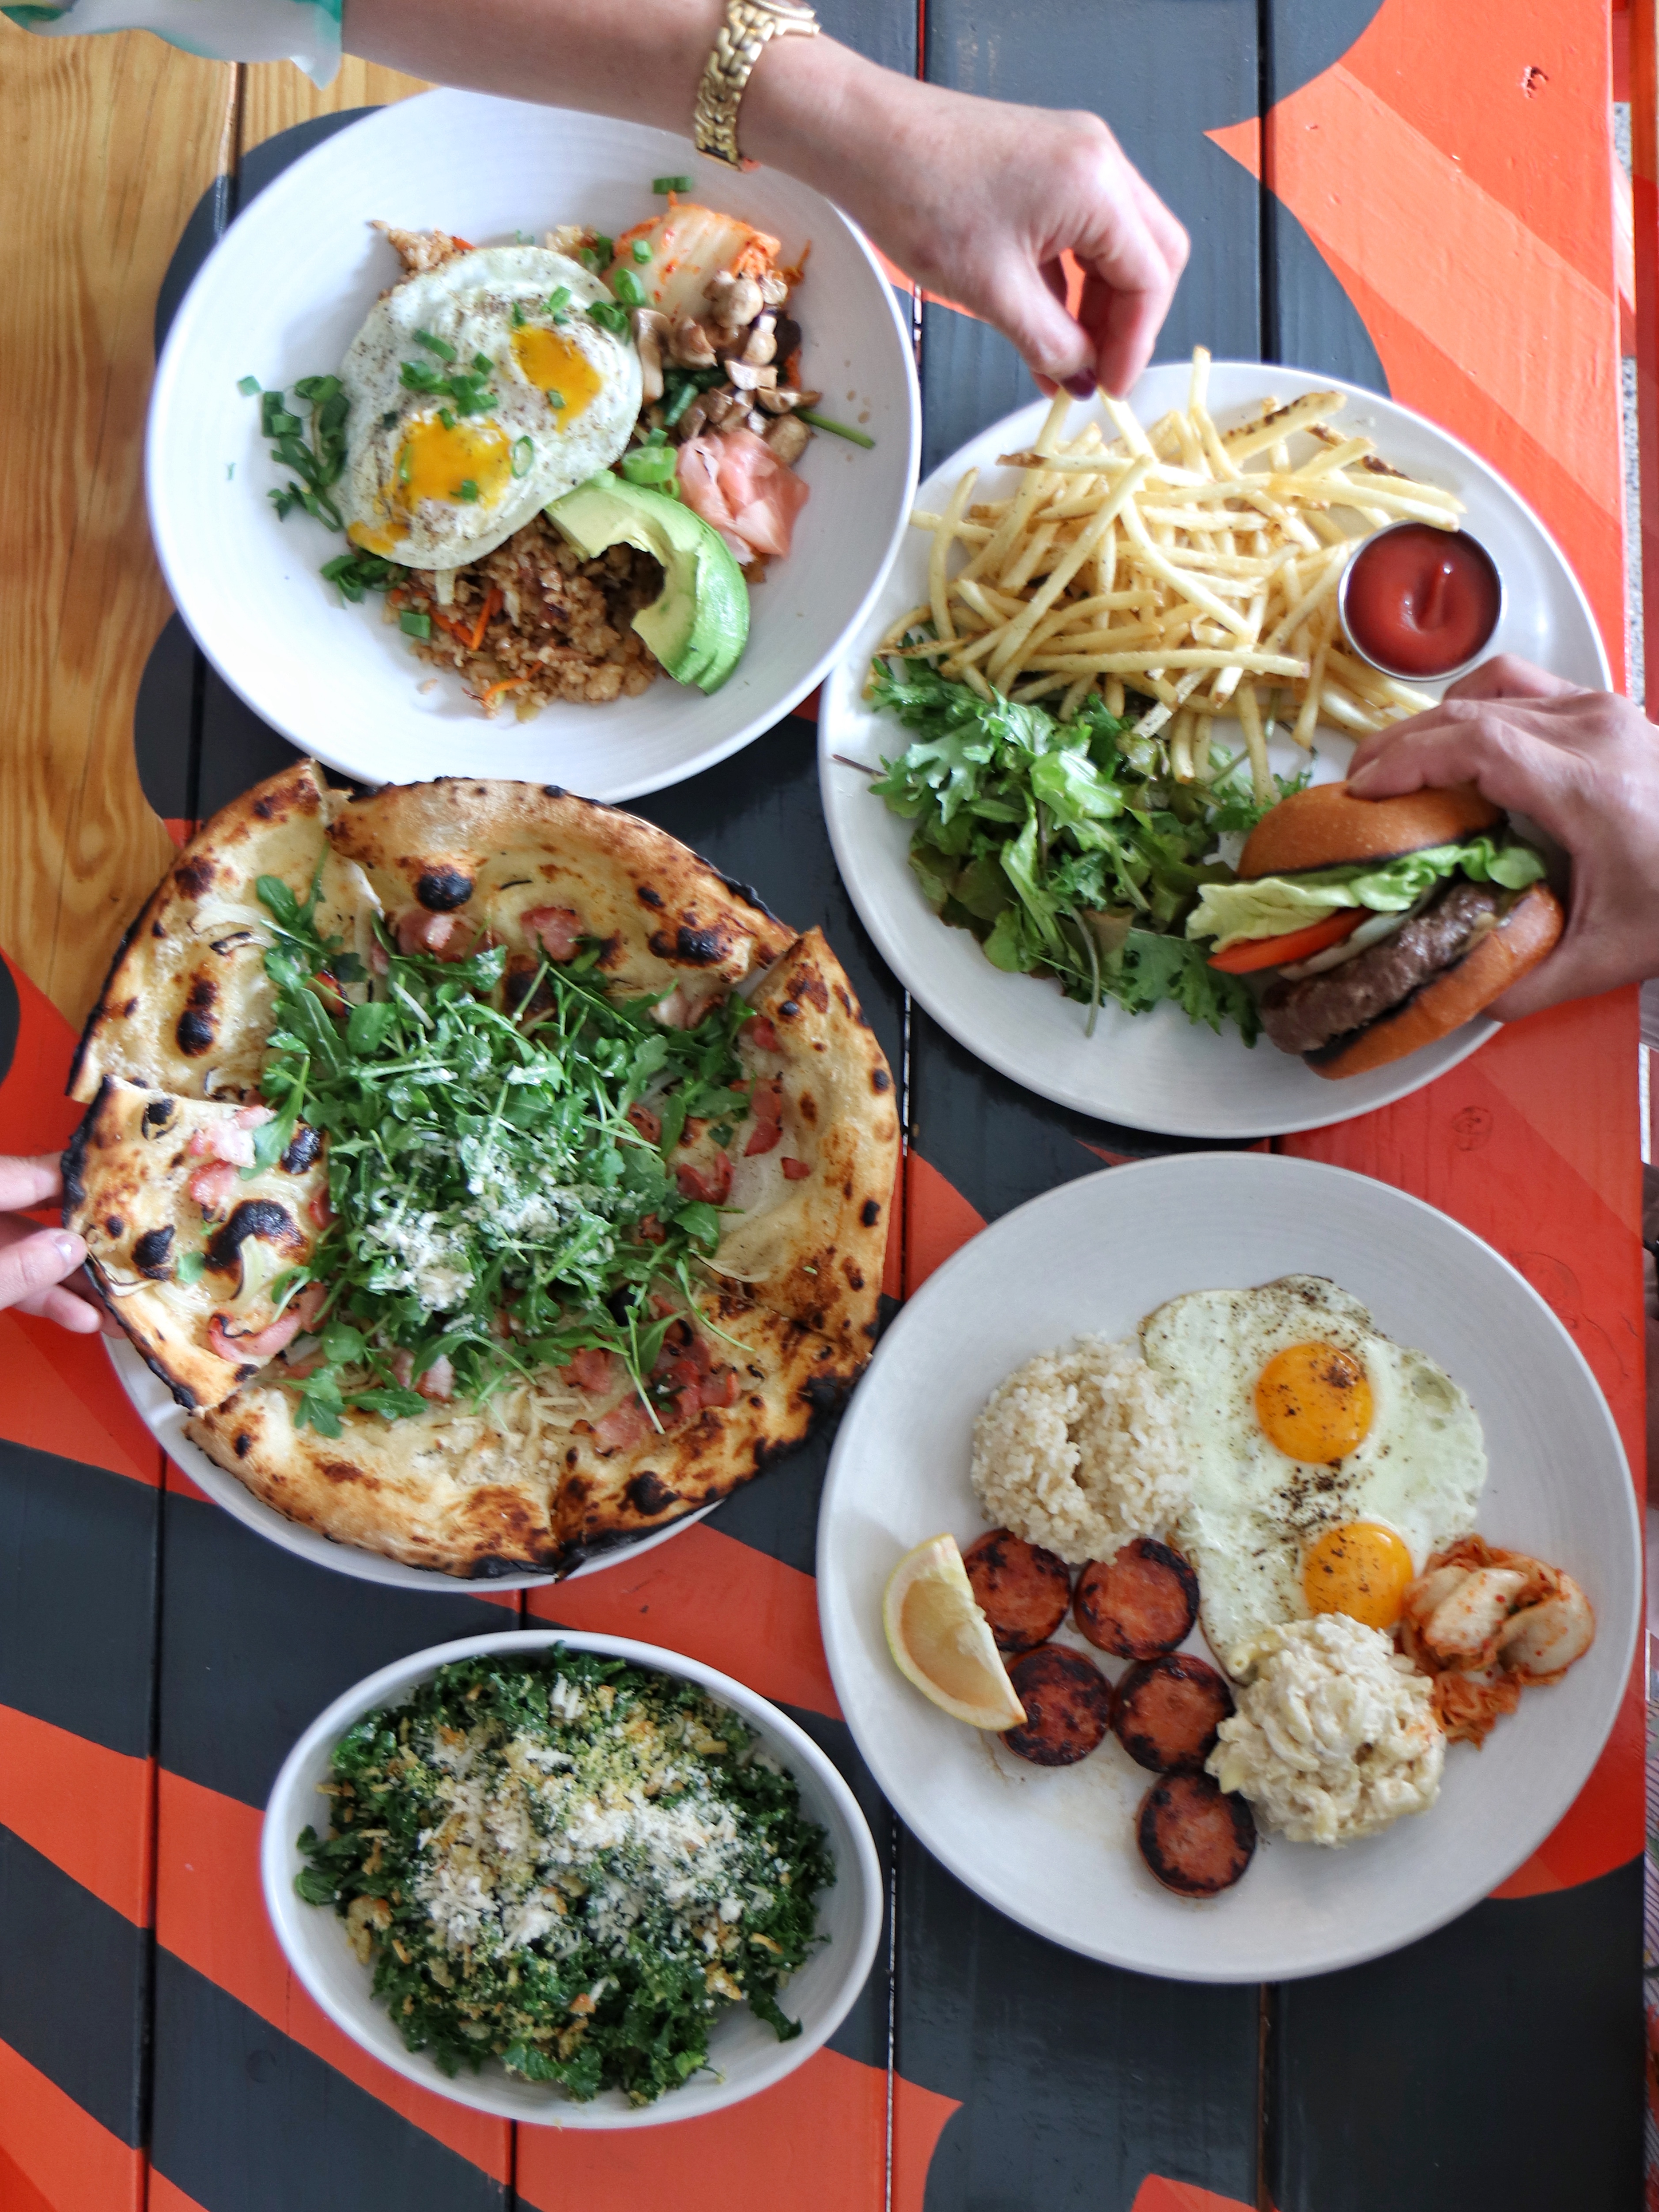 Where to Eat in Oahu - Mahina & Suns Brunch Spread - Photo by Indulgent Eats copy